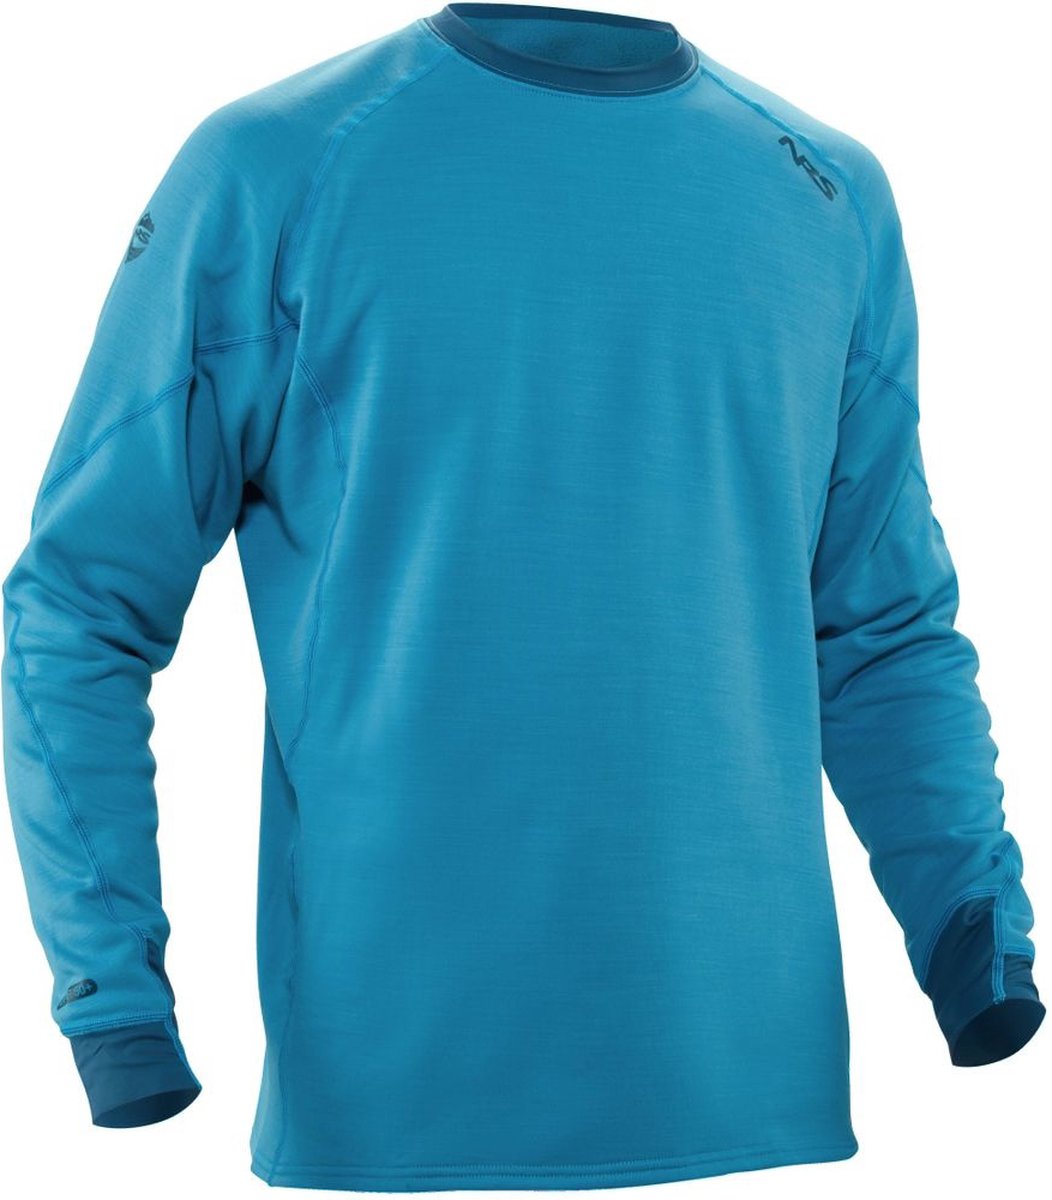 NRS NRS H2Core Expedition Shirt